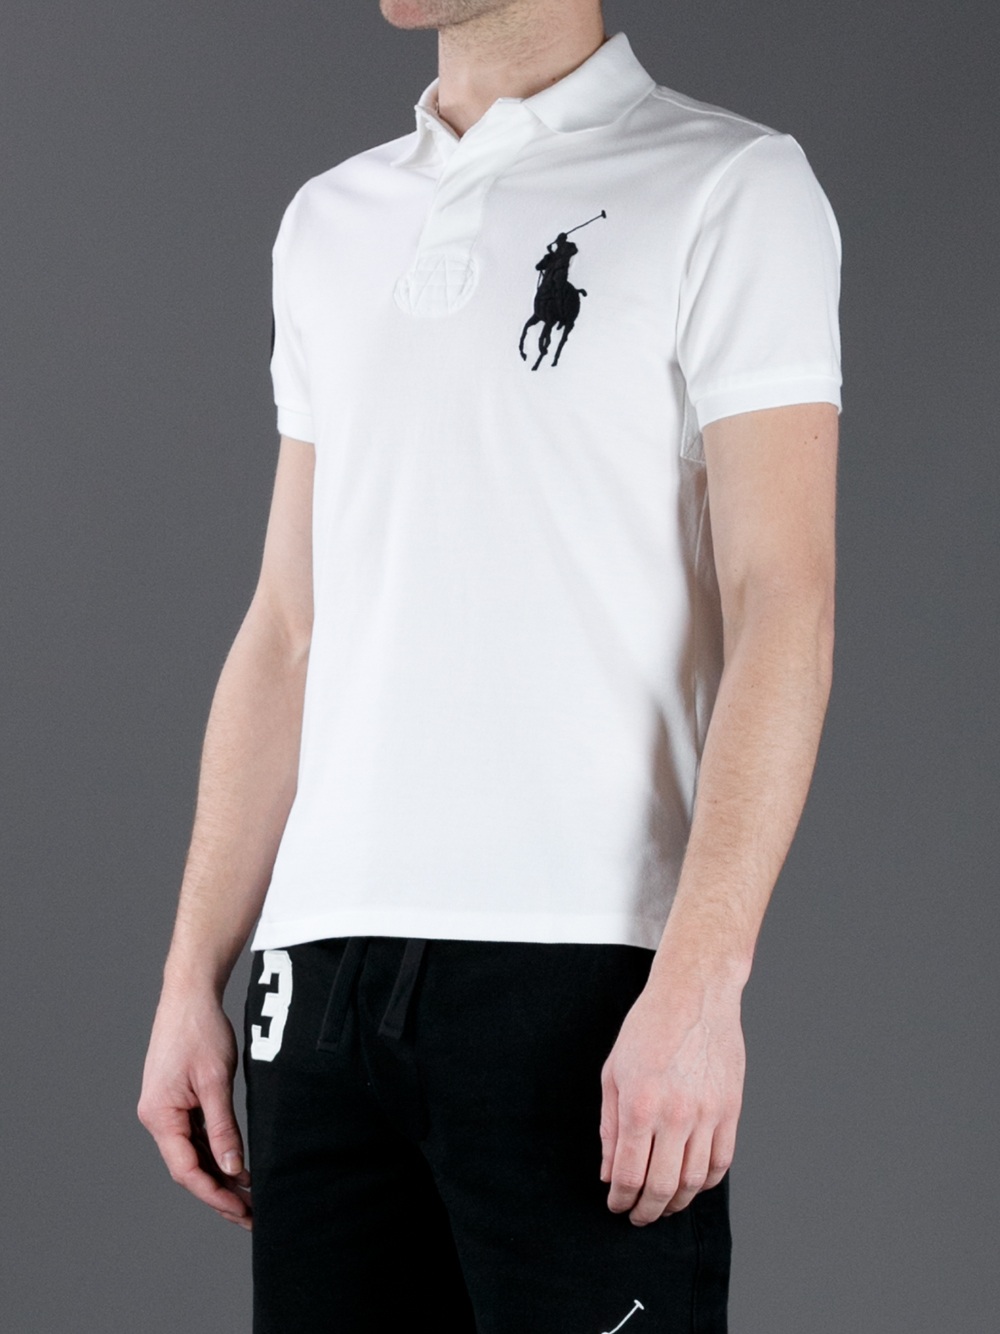 Lyst - Polo Ralph Lauren Fitted Logo Polo Shirt in White for Men